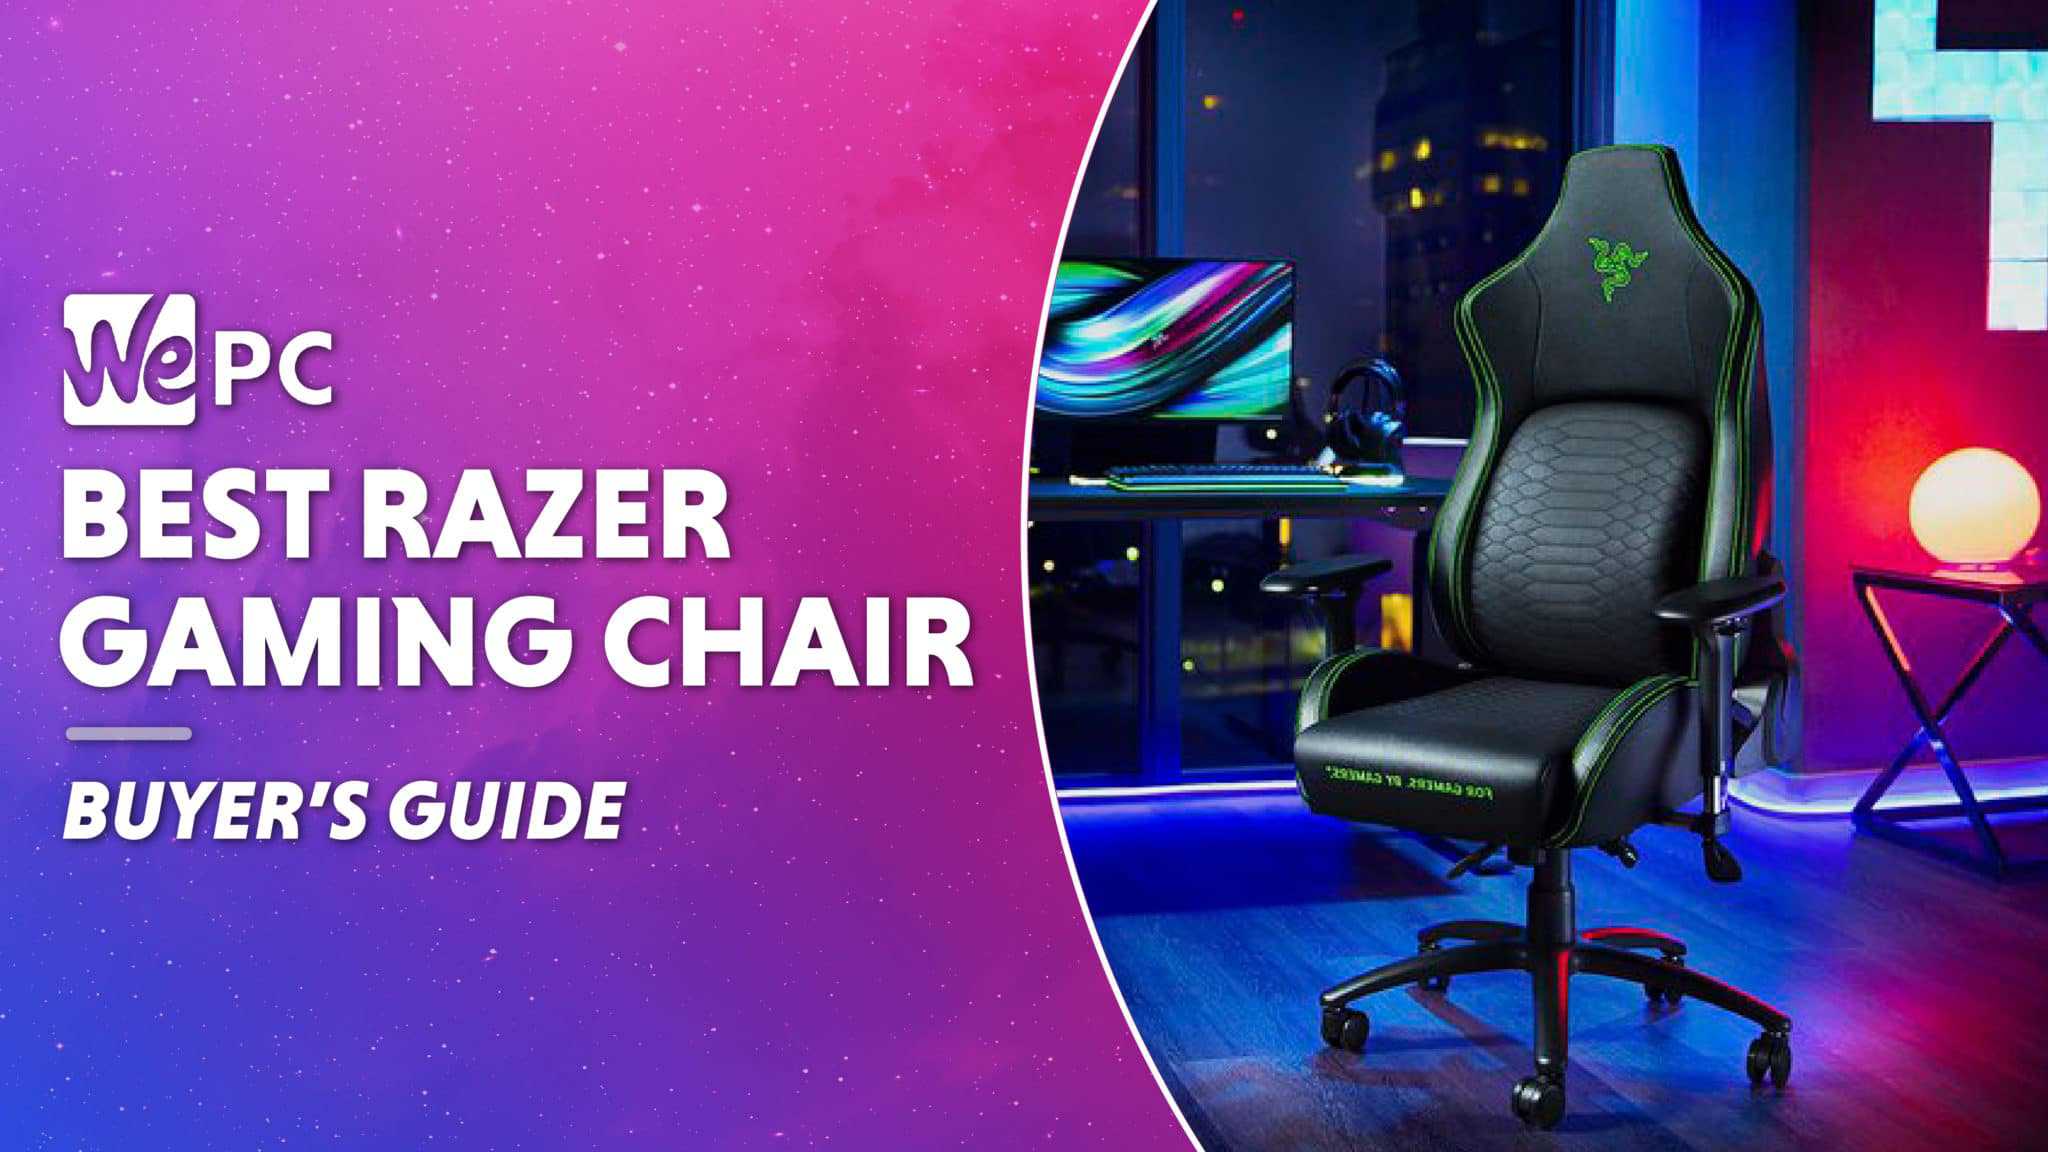 Maxnomic (Xbox Partner) released a special chair for Xbox events